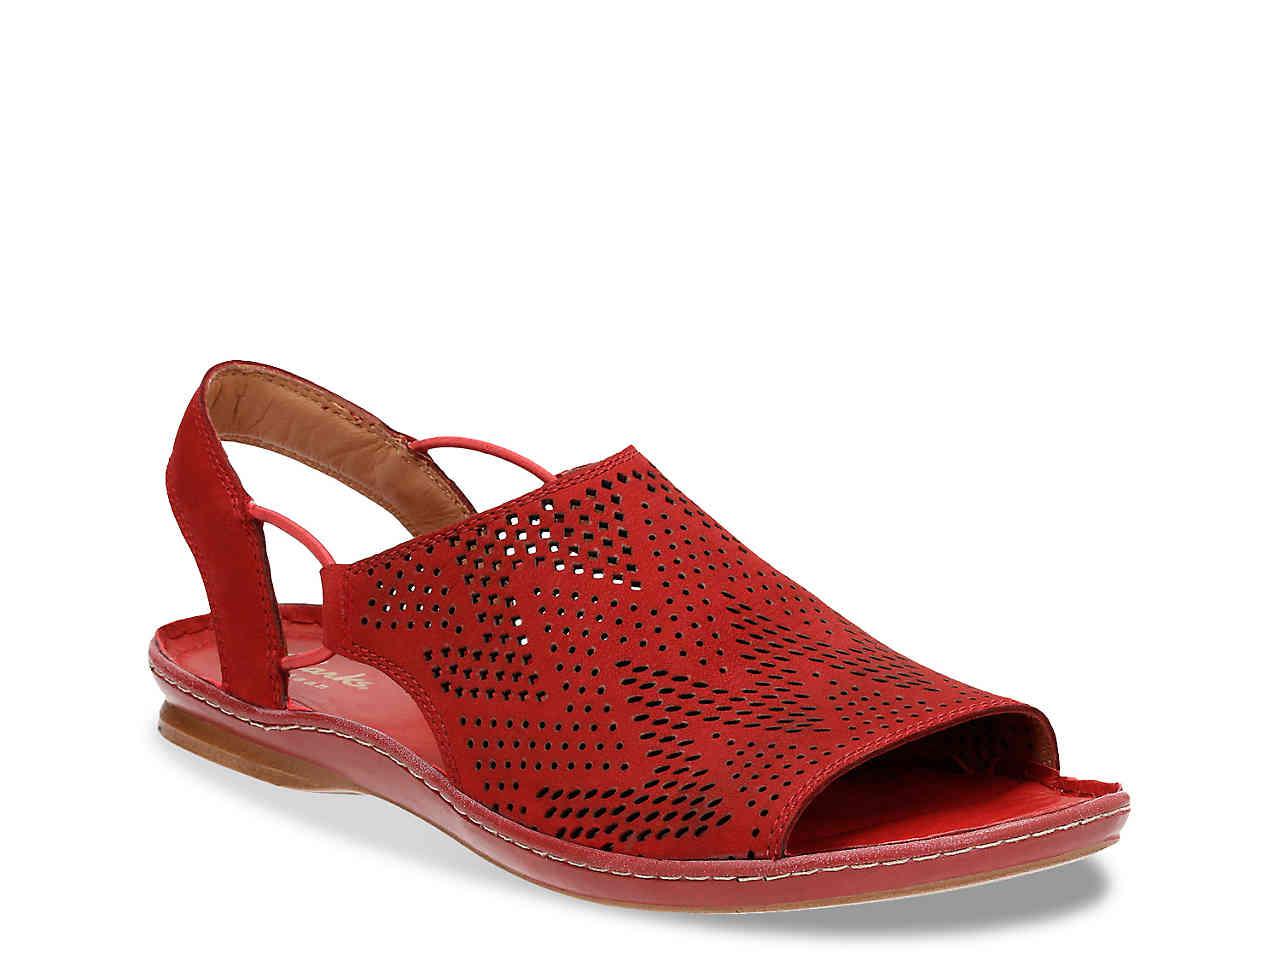 Clarks Leather Sarla Cadence Sandal in Red - Lyst